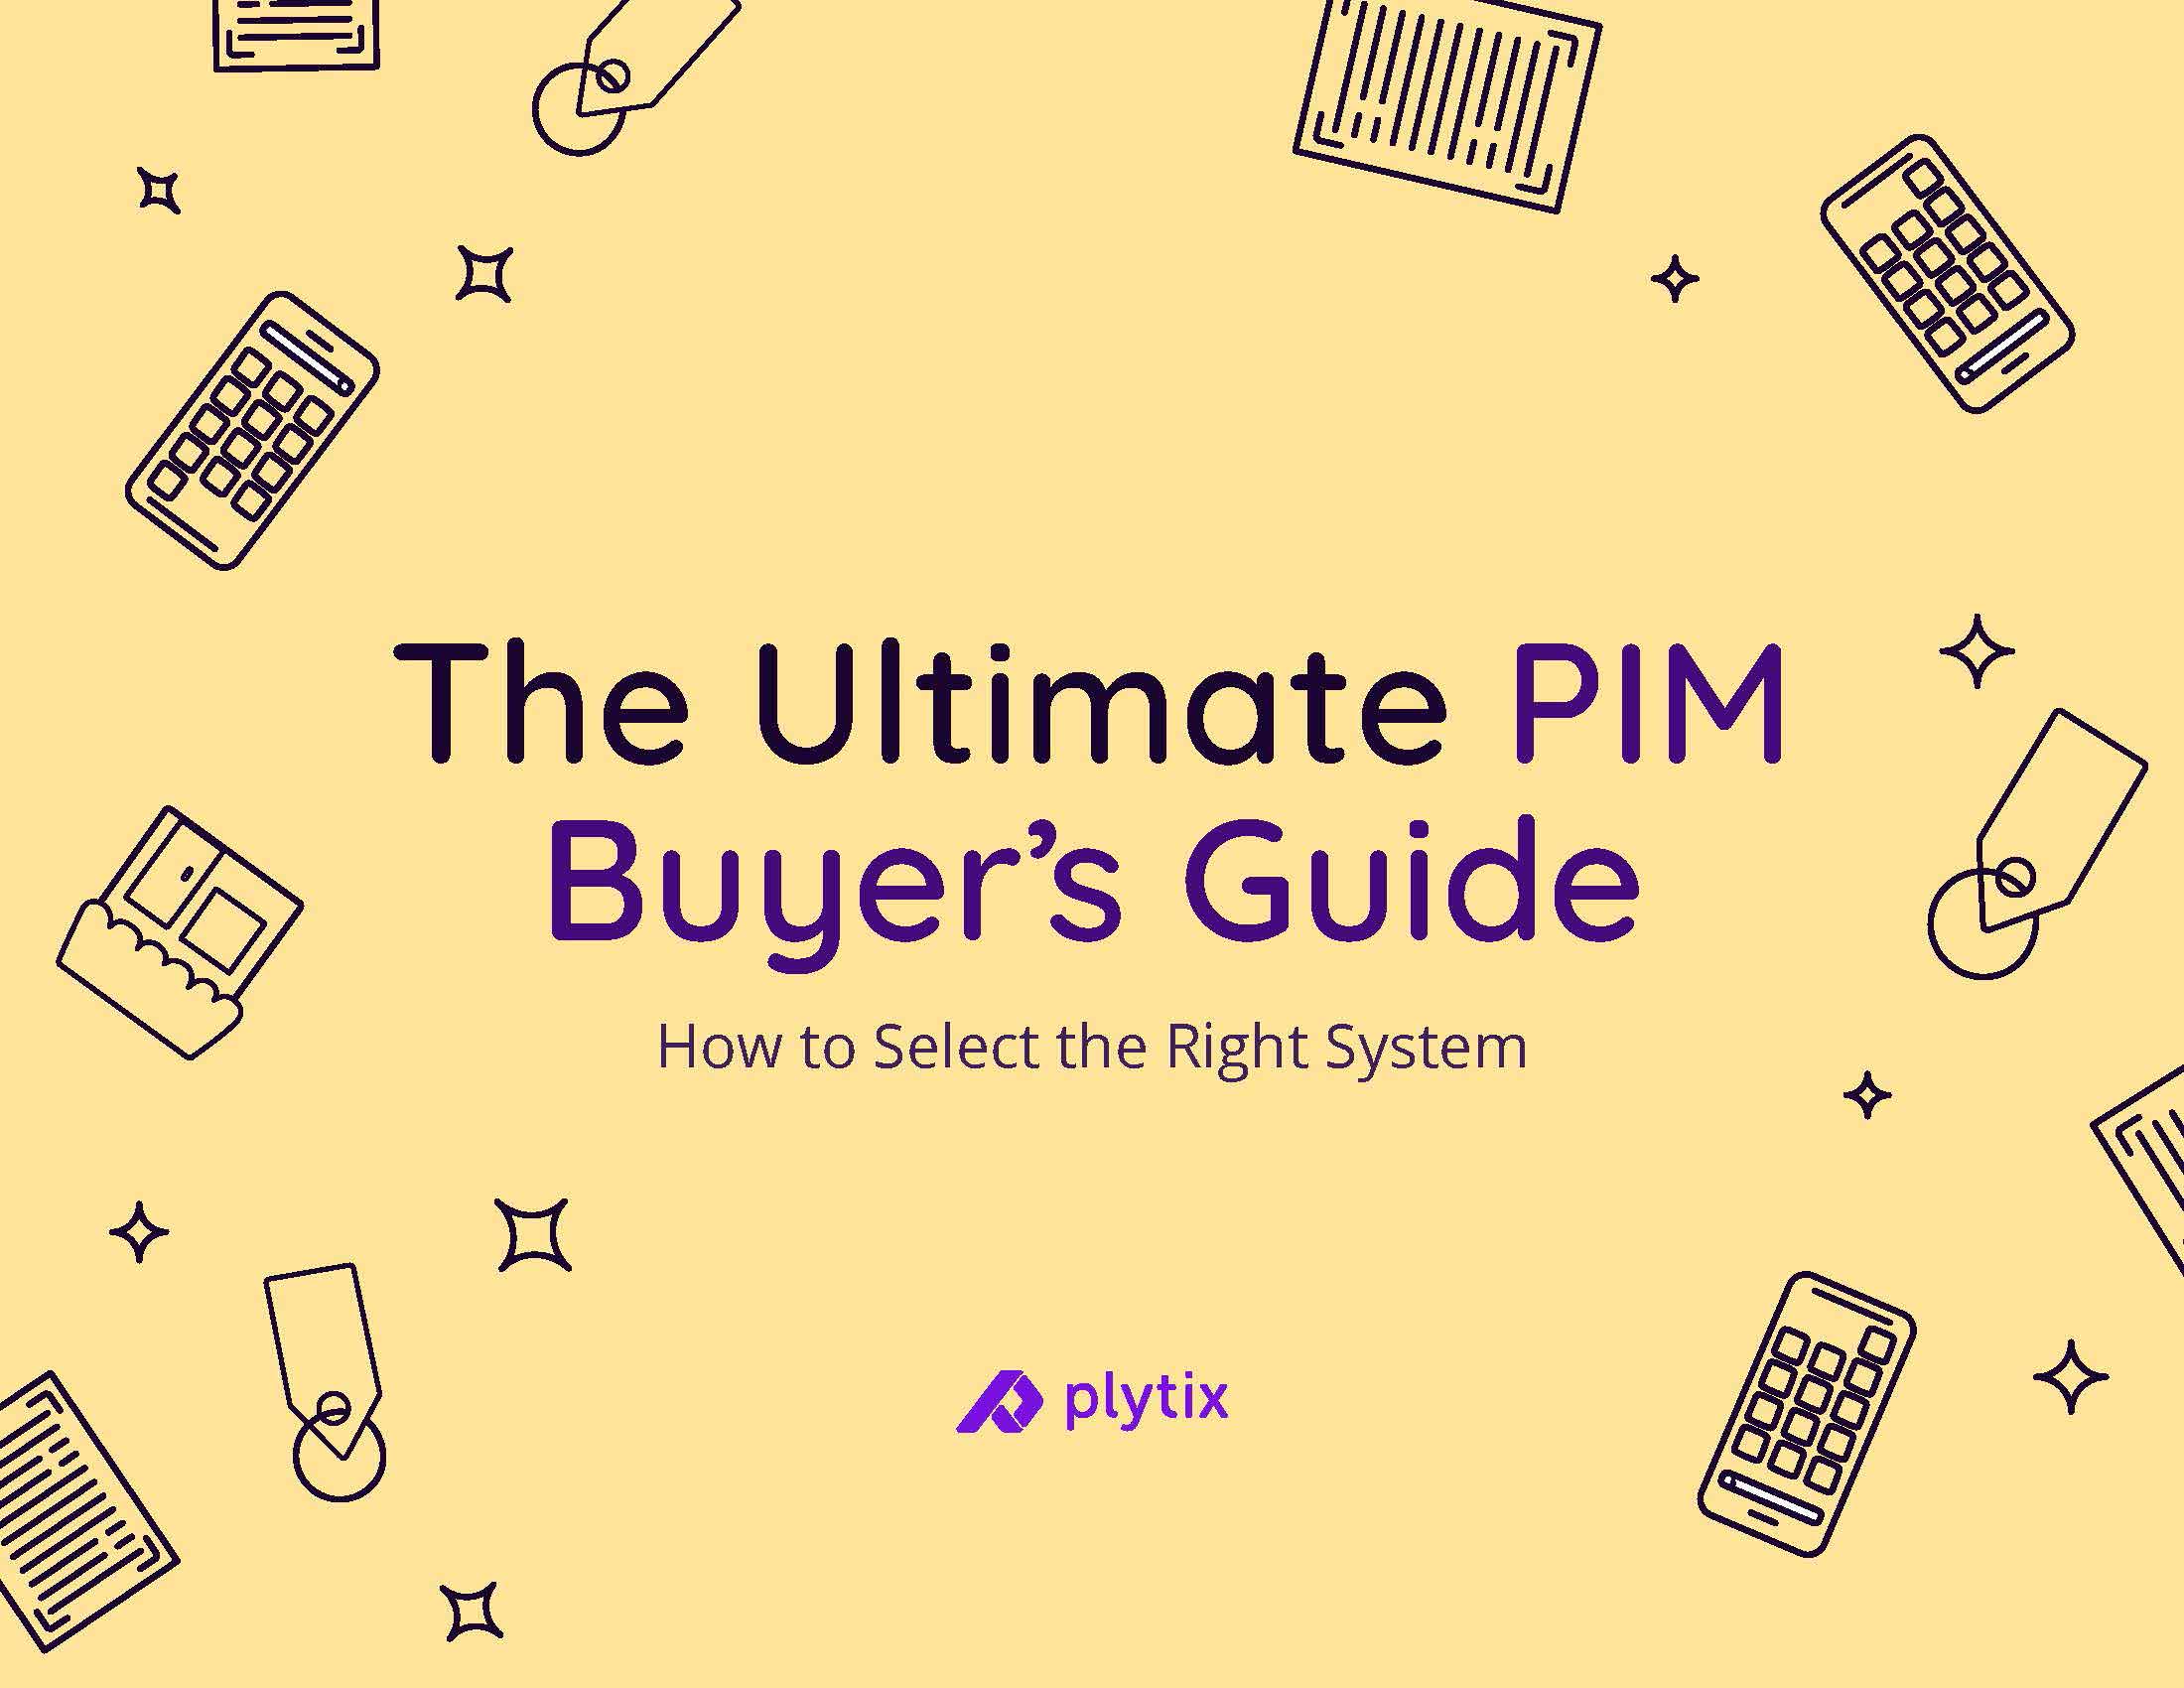 The Ultimate PIM Buyer's Guide: How to Select the Right System